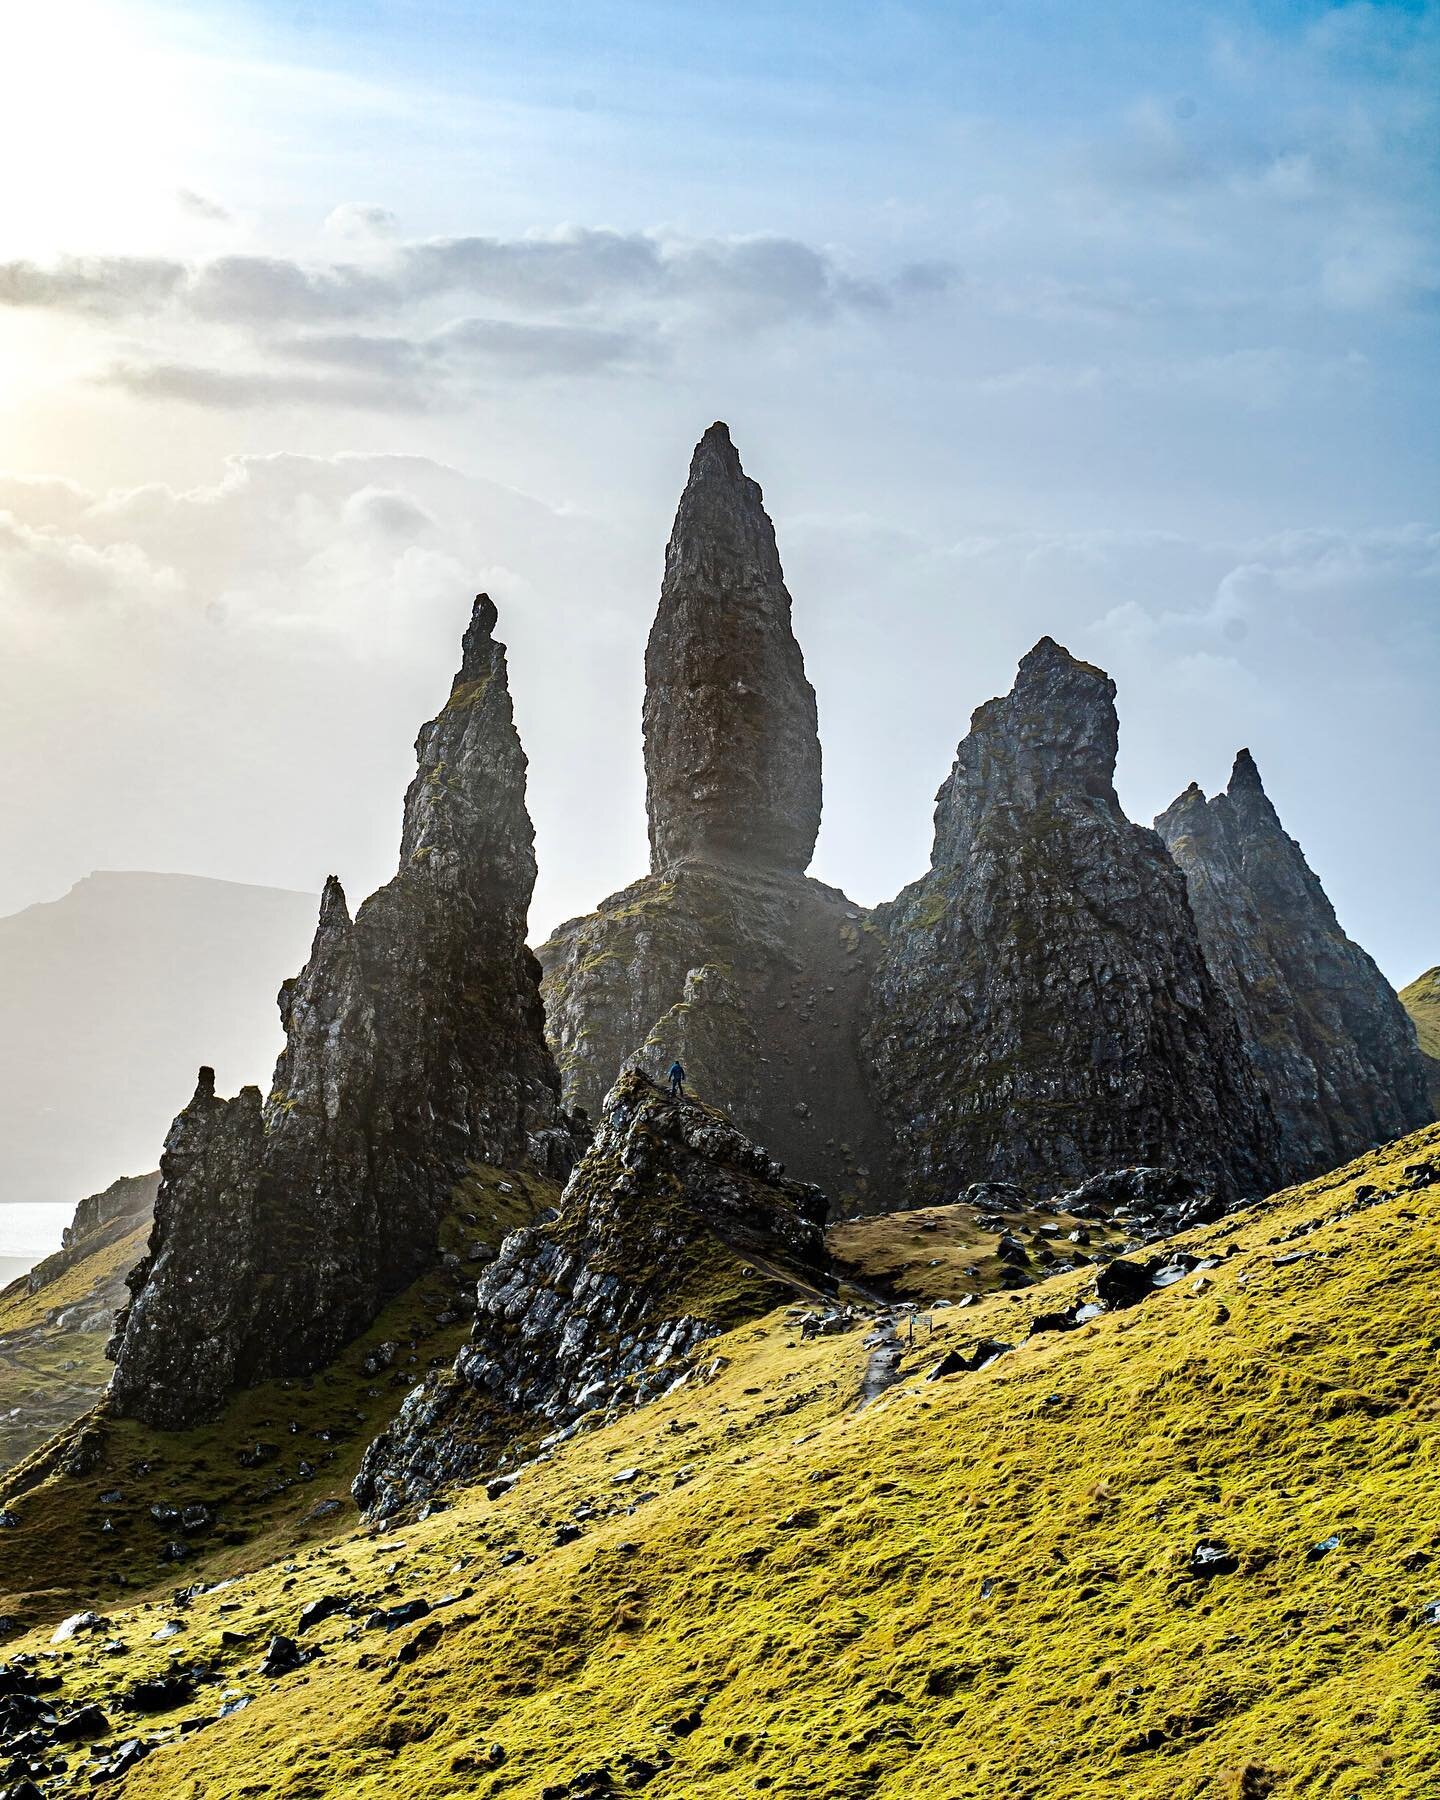 A windswept day at Storr.
Legend has it that the Old Man of Storr was a giant who had lived in Trotternish Ridge and when he was buried, his thumb was left jutting out of the ground, creating the famous jagged landscape.

Spot David trying not to get